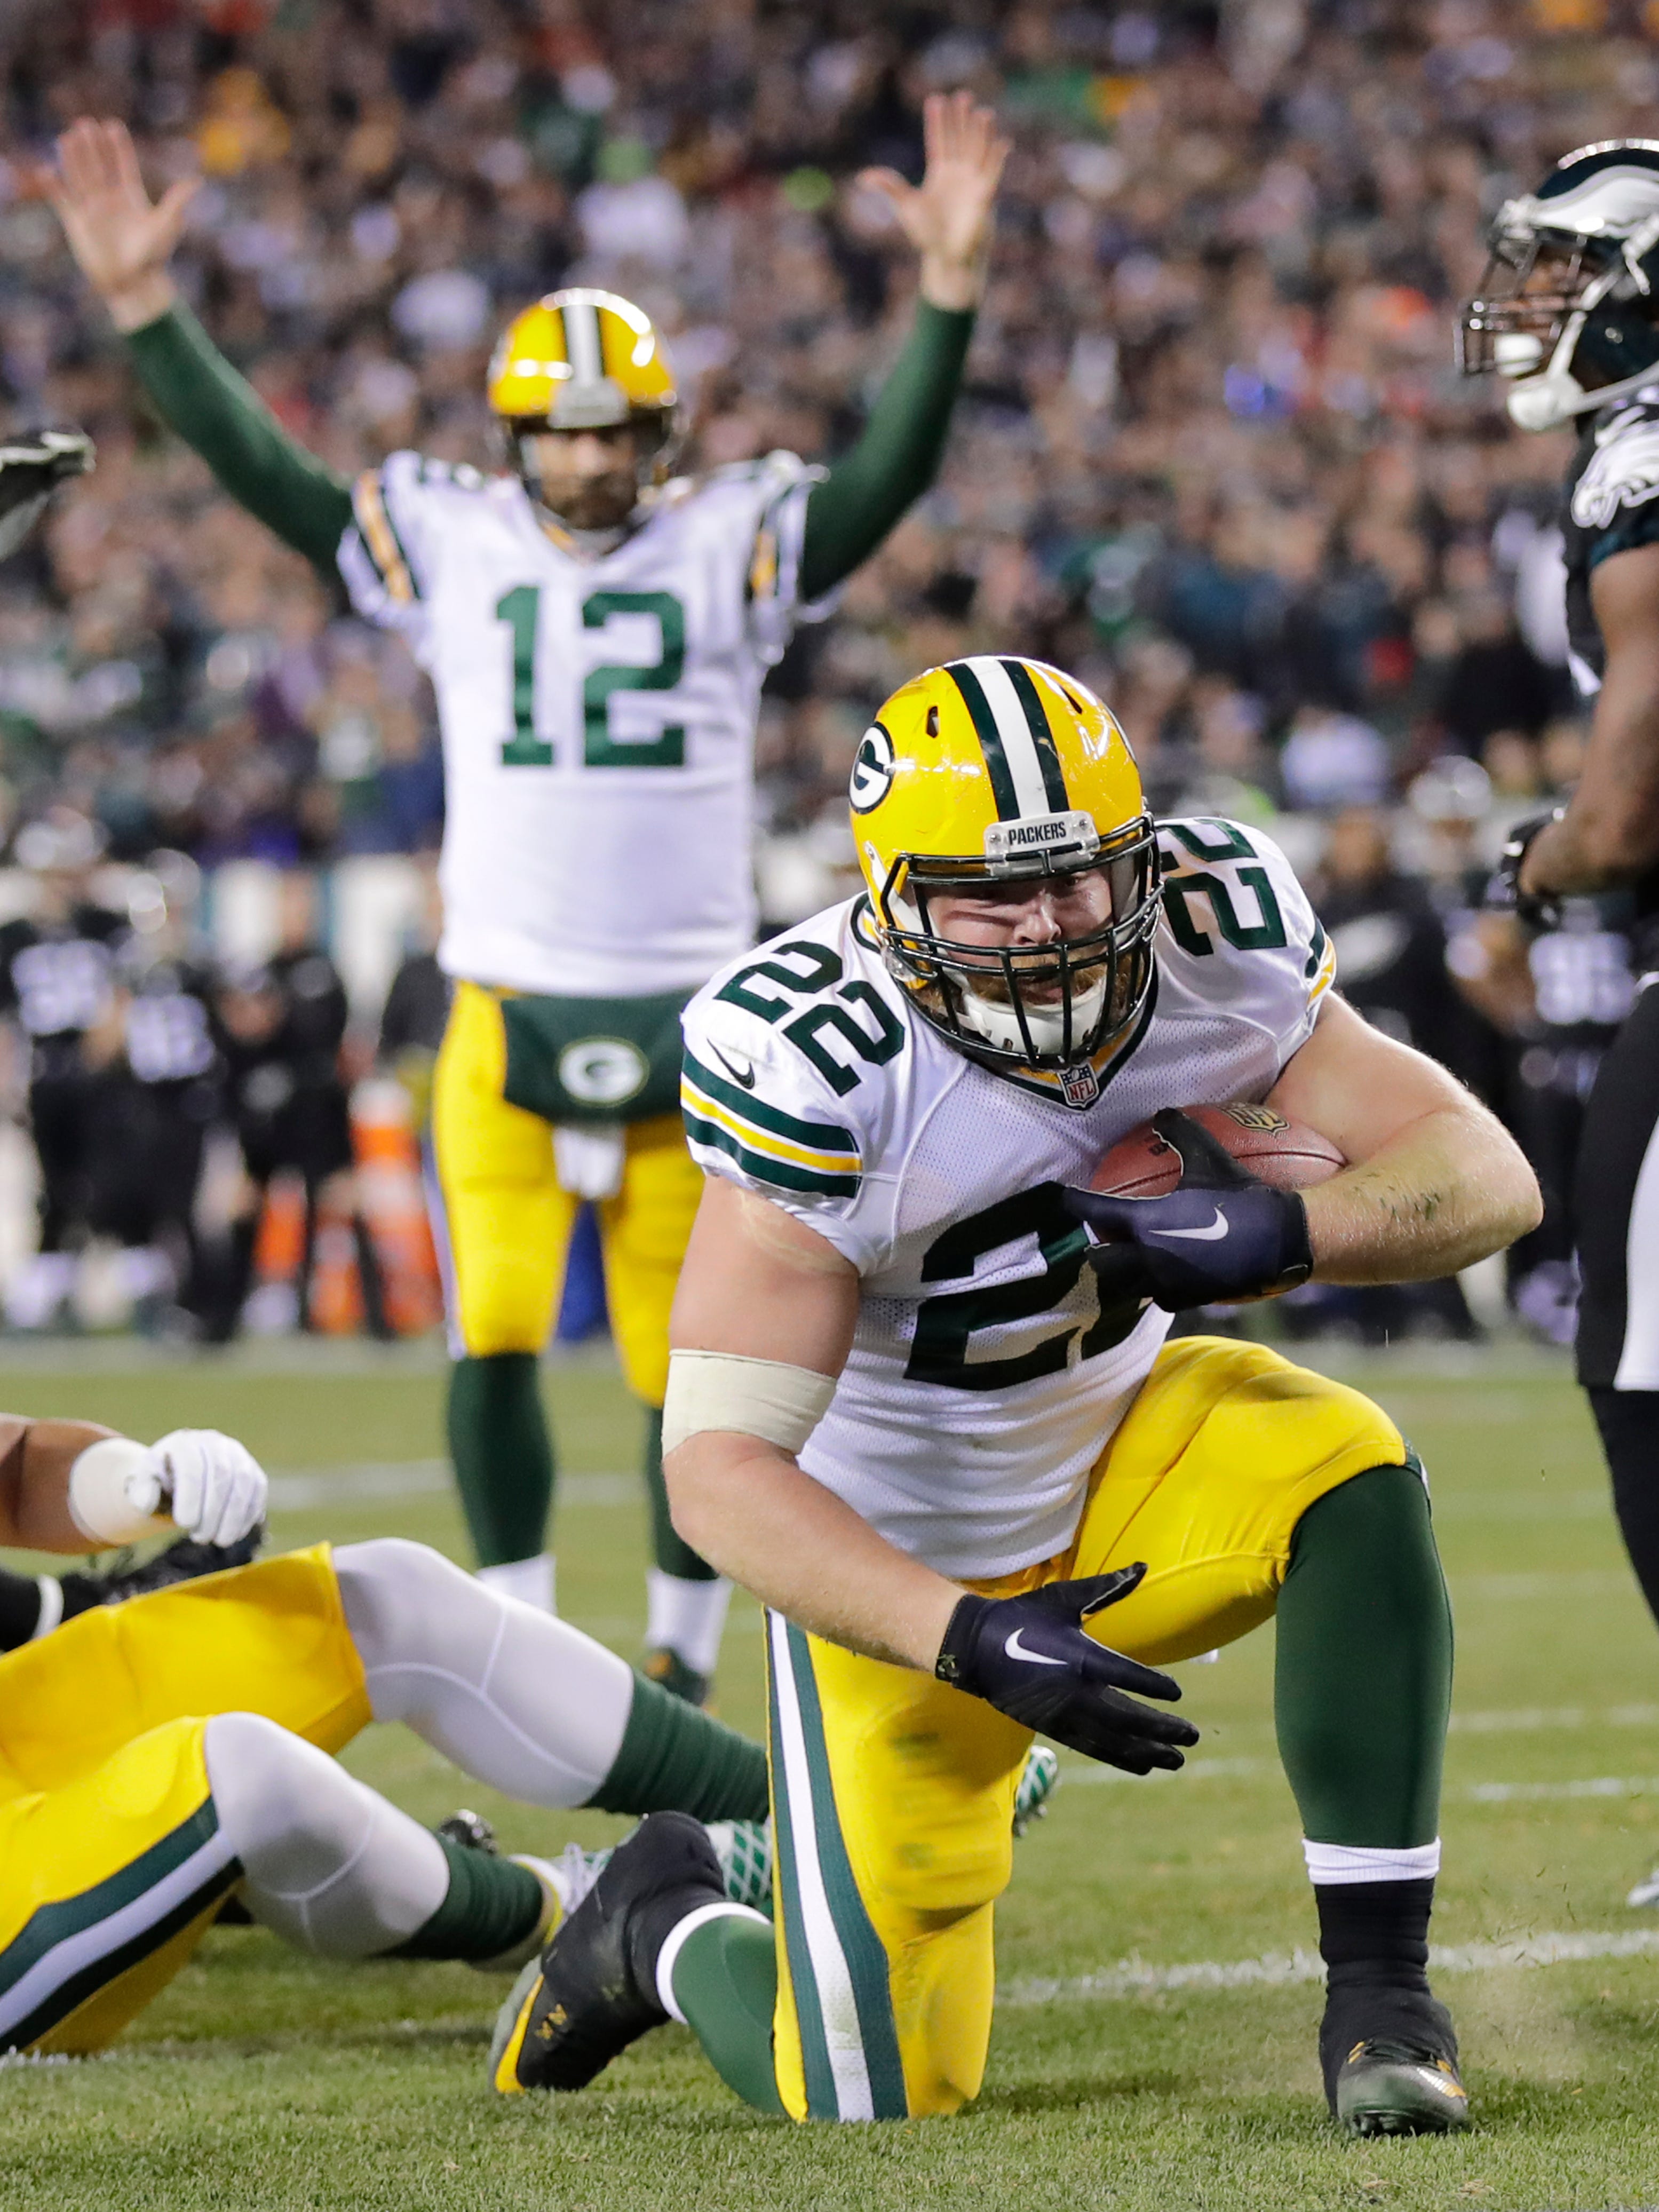 Green Bay Packers' Aaron Ripkowski scores a touchdown in the fourth quarter.

The Green Bay Packers play against the Philadelphia Eagles Monday, November 28, 2016, at Lincoln Financial Field in Philadelphia, Pa.